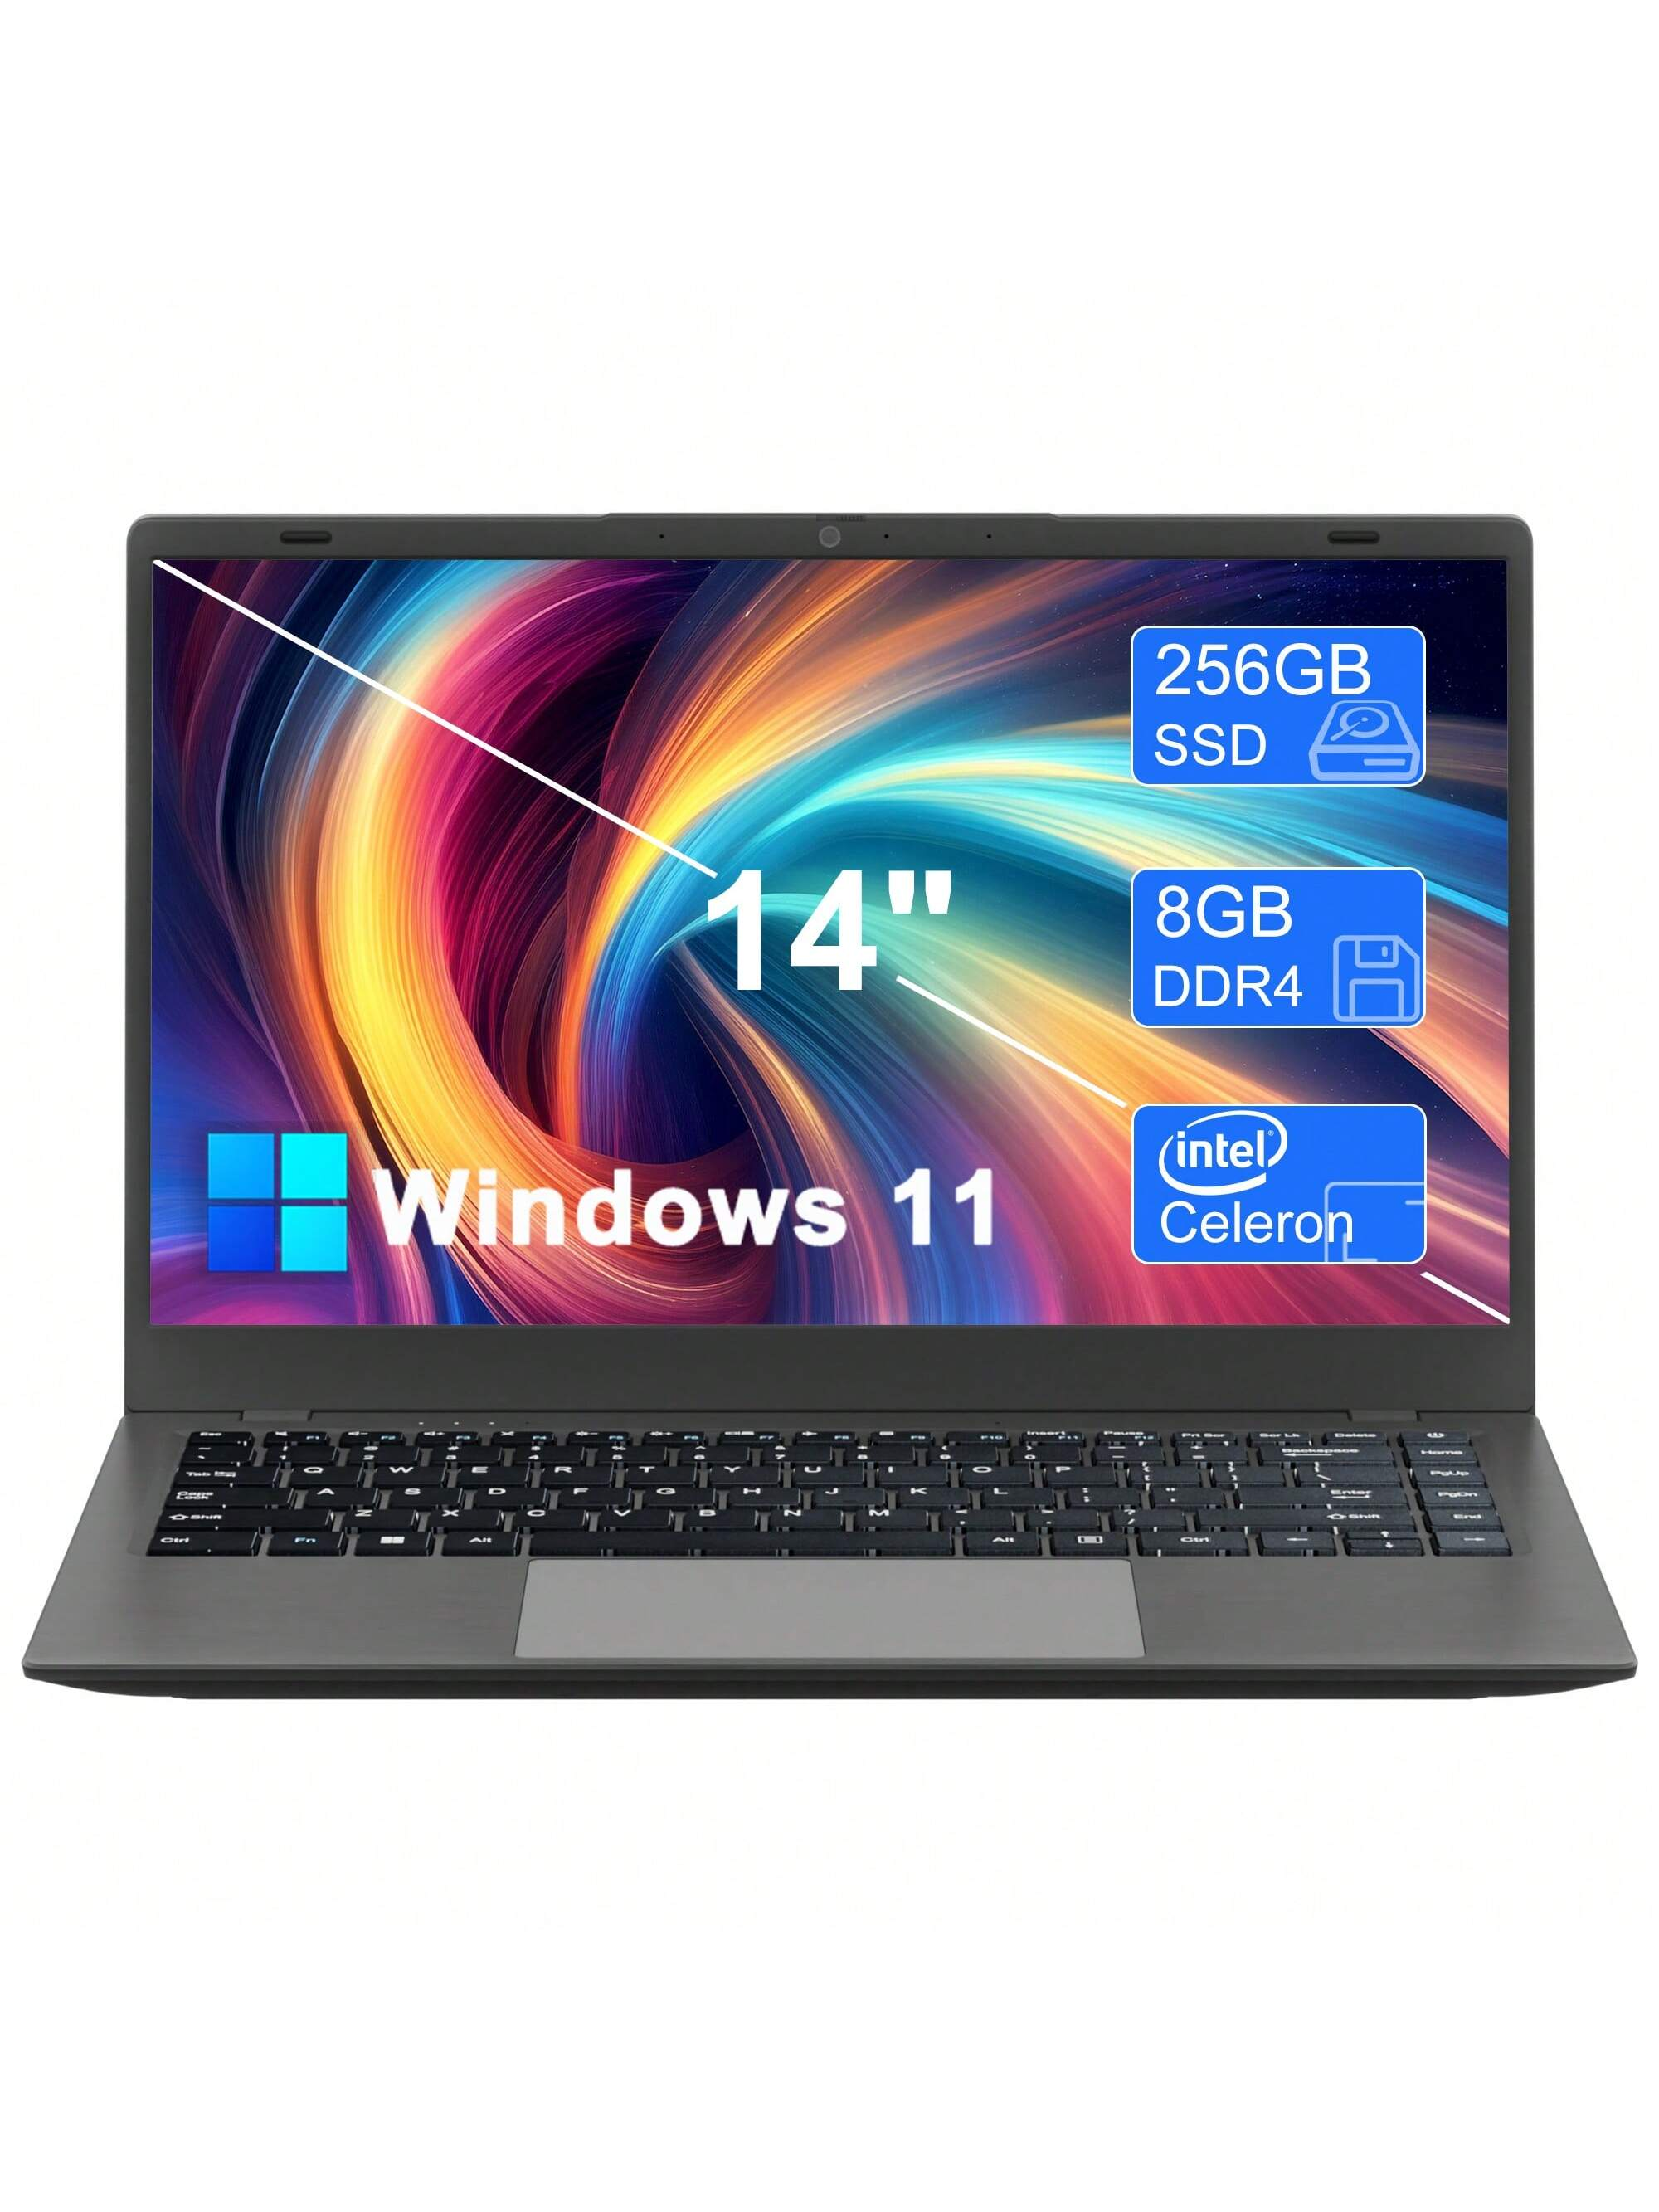 14 Inch Laptop Computer,8GB LPDDR4 RAM 256GB SSD, Intel Celeron N4000(Up To 2.6GHz), 1366x768 HD, 5.0G Dual WiFi, Webcam HDMI, USBX2, TF Card, Windows 11 Home, Full-Featured Type-C